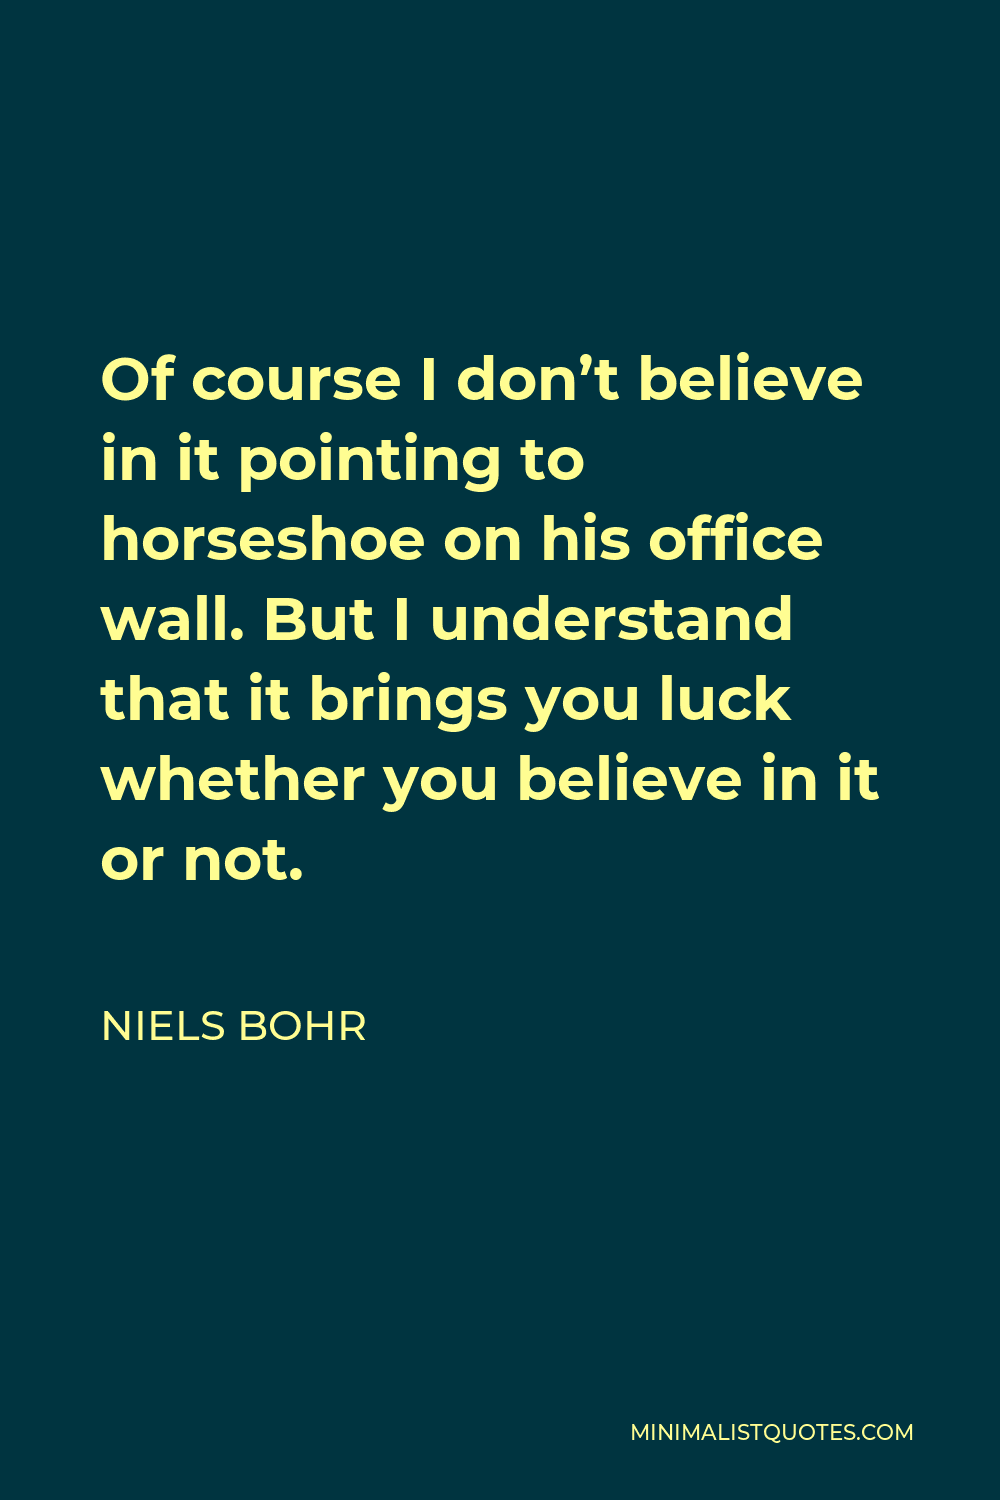 Niels Bohr Quote - Of course I don’t believe in it pointing to horseshoe on his office wall. But I understand that it brings you luck whether you believe in it or not.